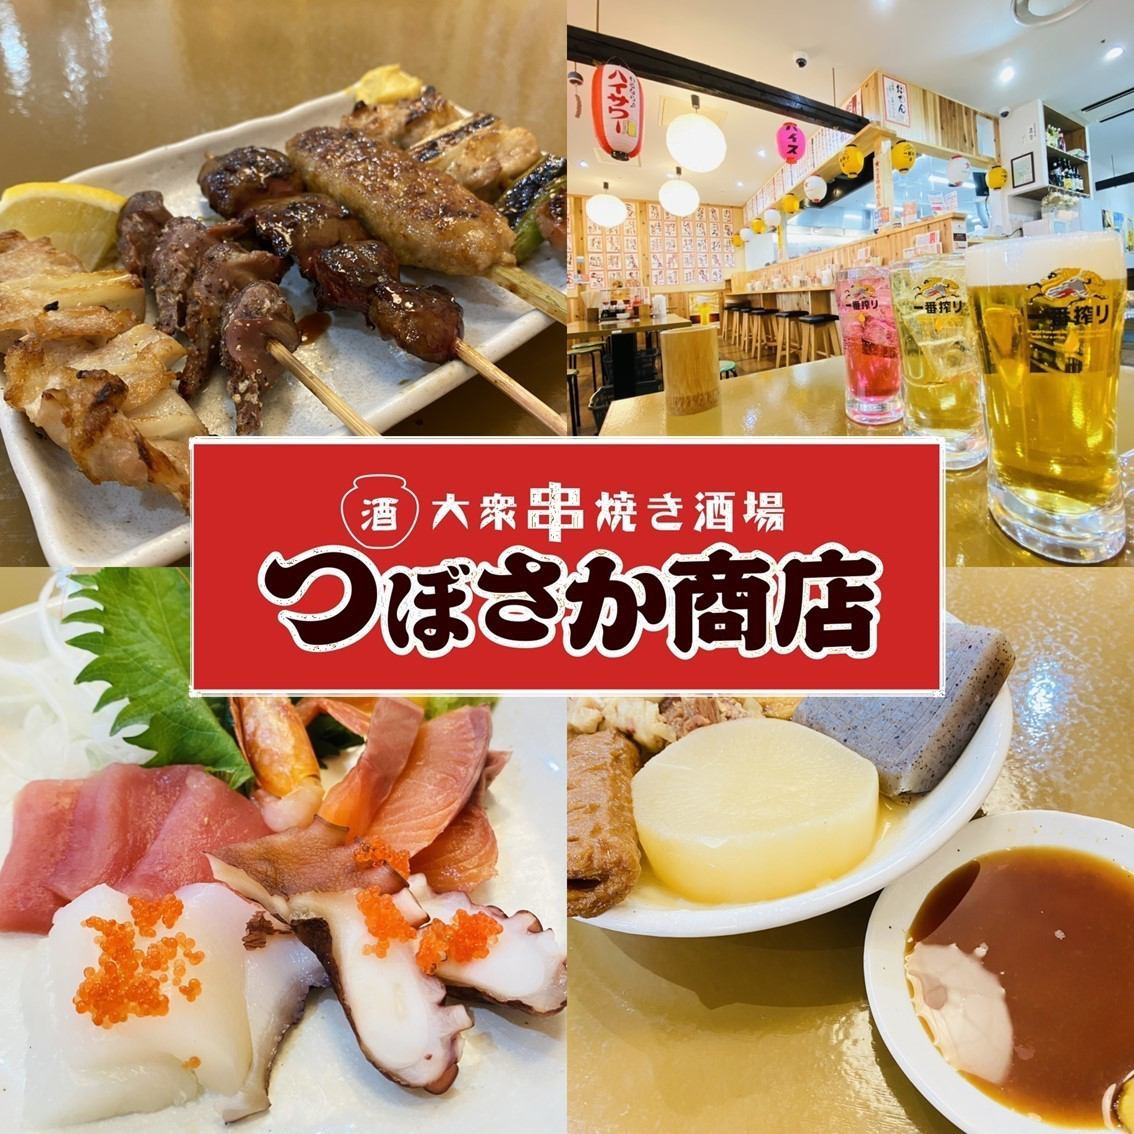 A popular izakaya near the station where you can easily drink! Even one person is OK! Enjoy drinking with friends and colleagues